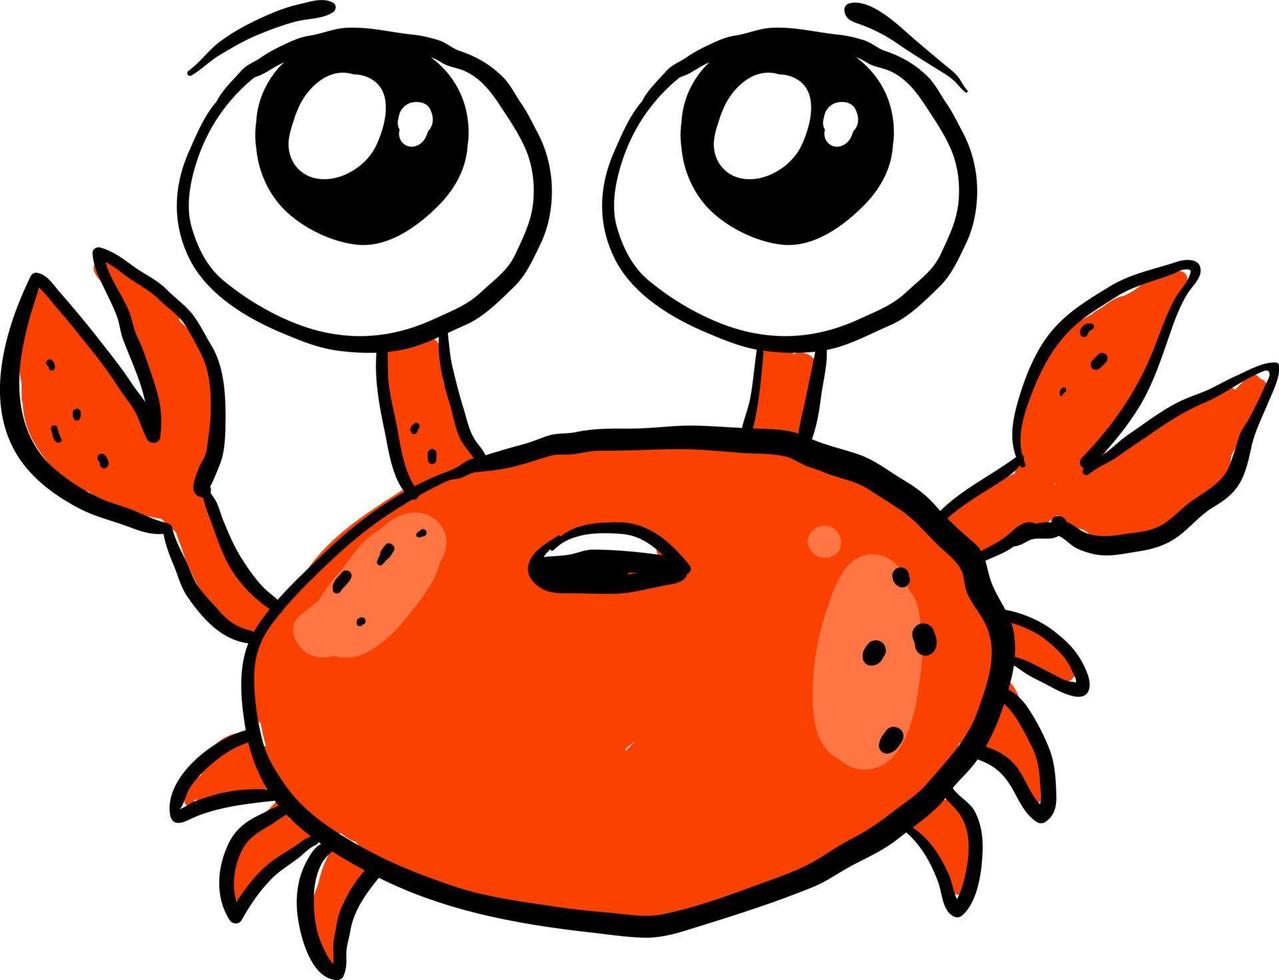 Cute crab, illustration, vector on white background.